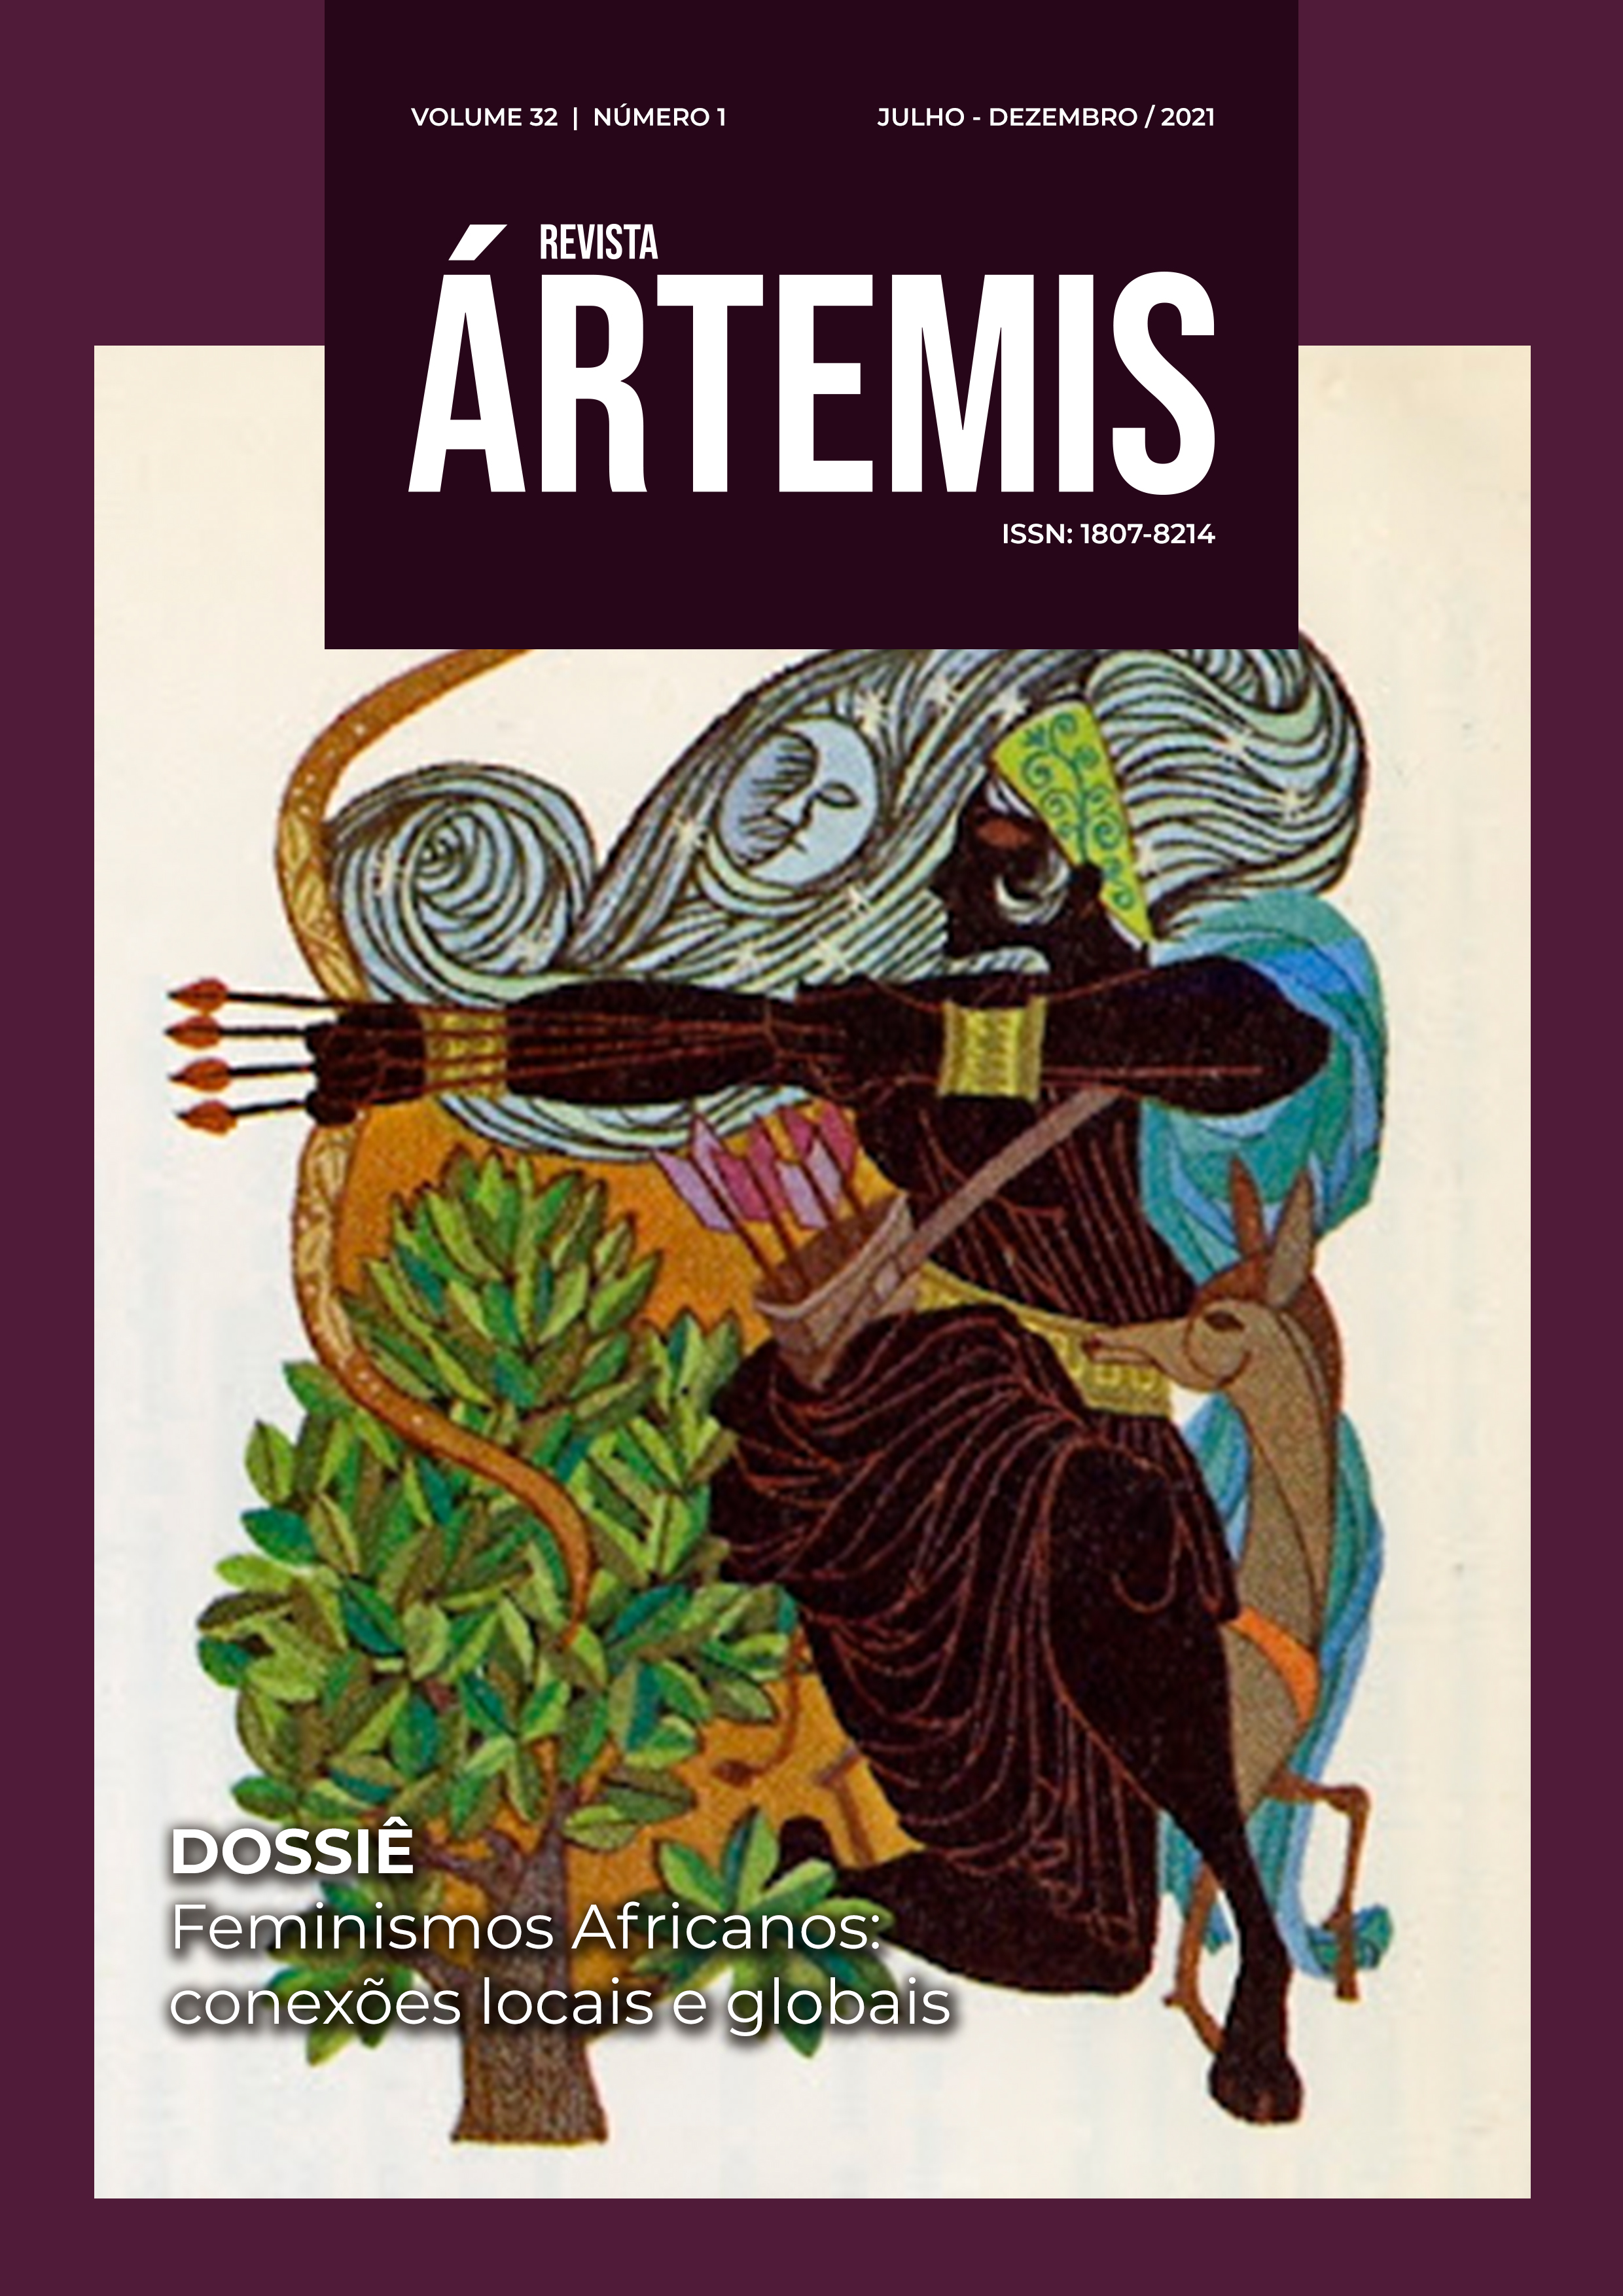 Artemis, by Leon and Diane Dillon for C.M. Bowra´s Classic Greek